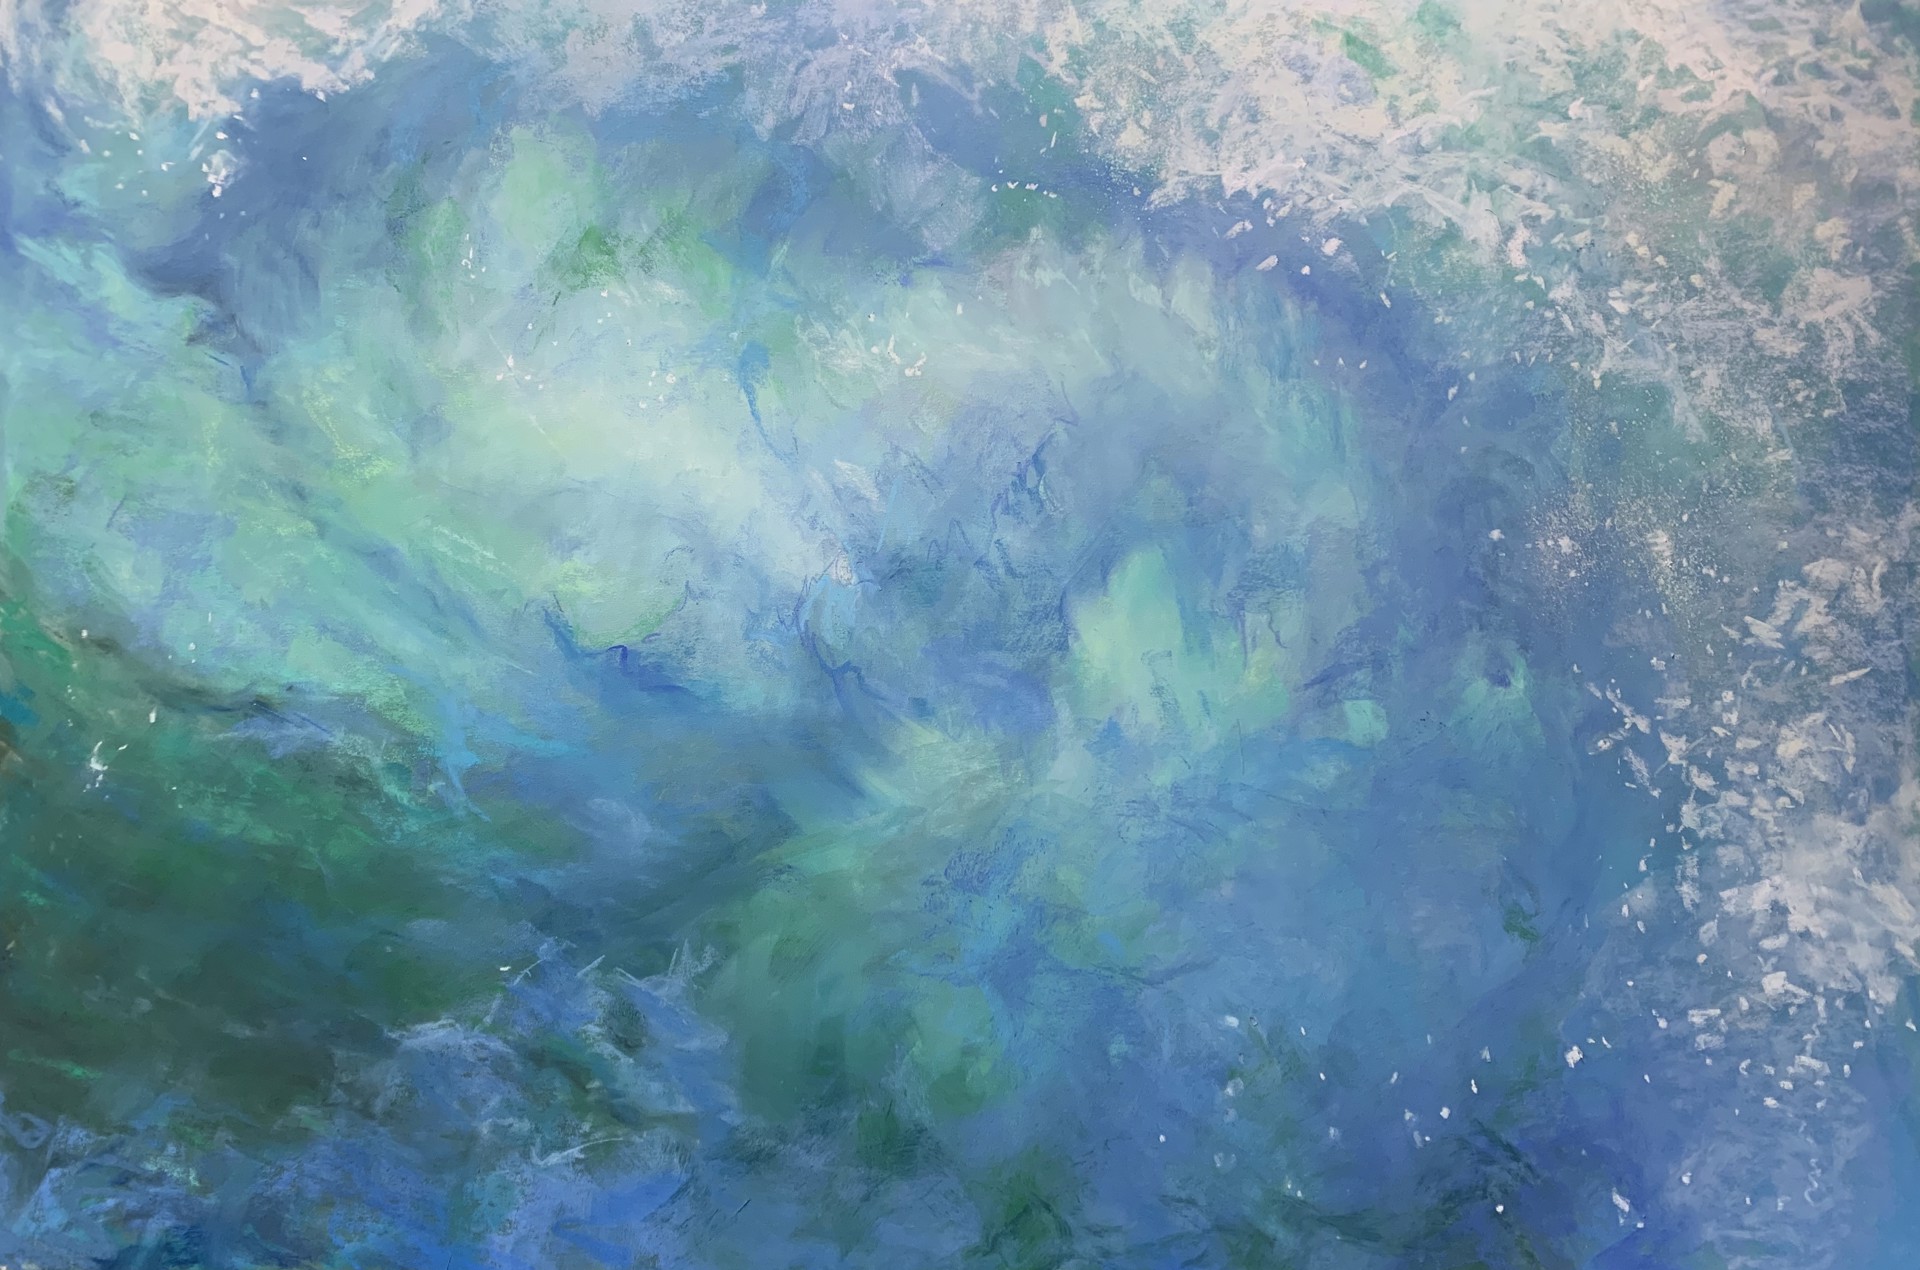 Sea Cosmos by Jeanne Rosier Smith